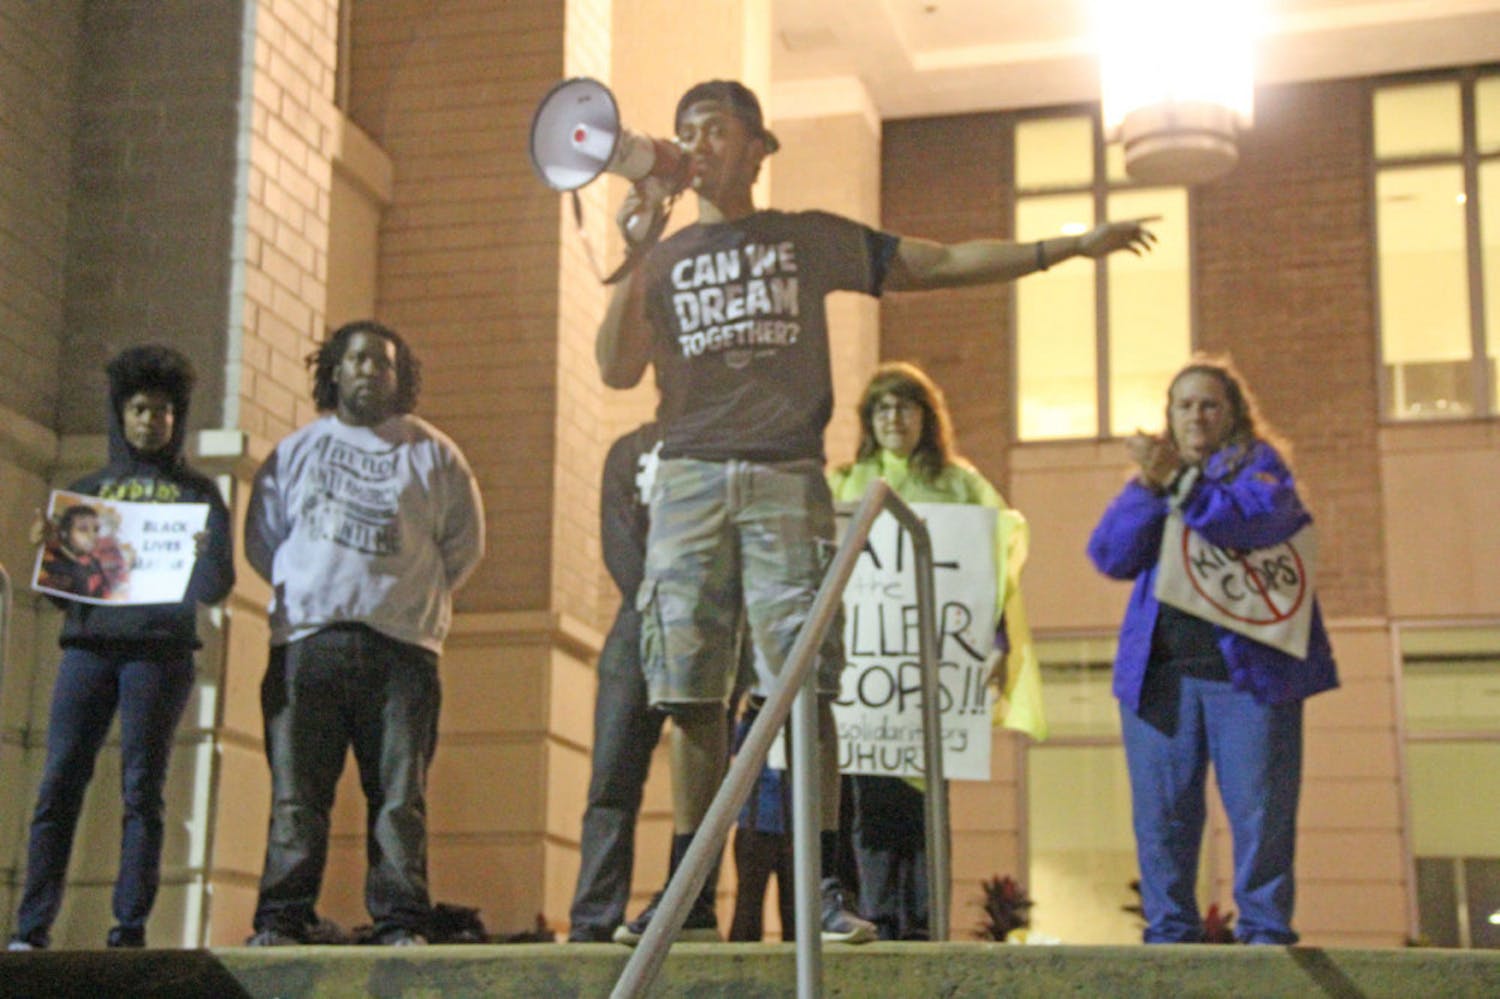 Azaari Mason, a 19-year-old UF political science junior, speaks to a crowd of people at the Gainesville Courthouse downtown&nbsp;Tuesday&nbsp;evening.&nbsp;